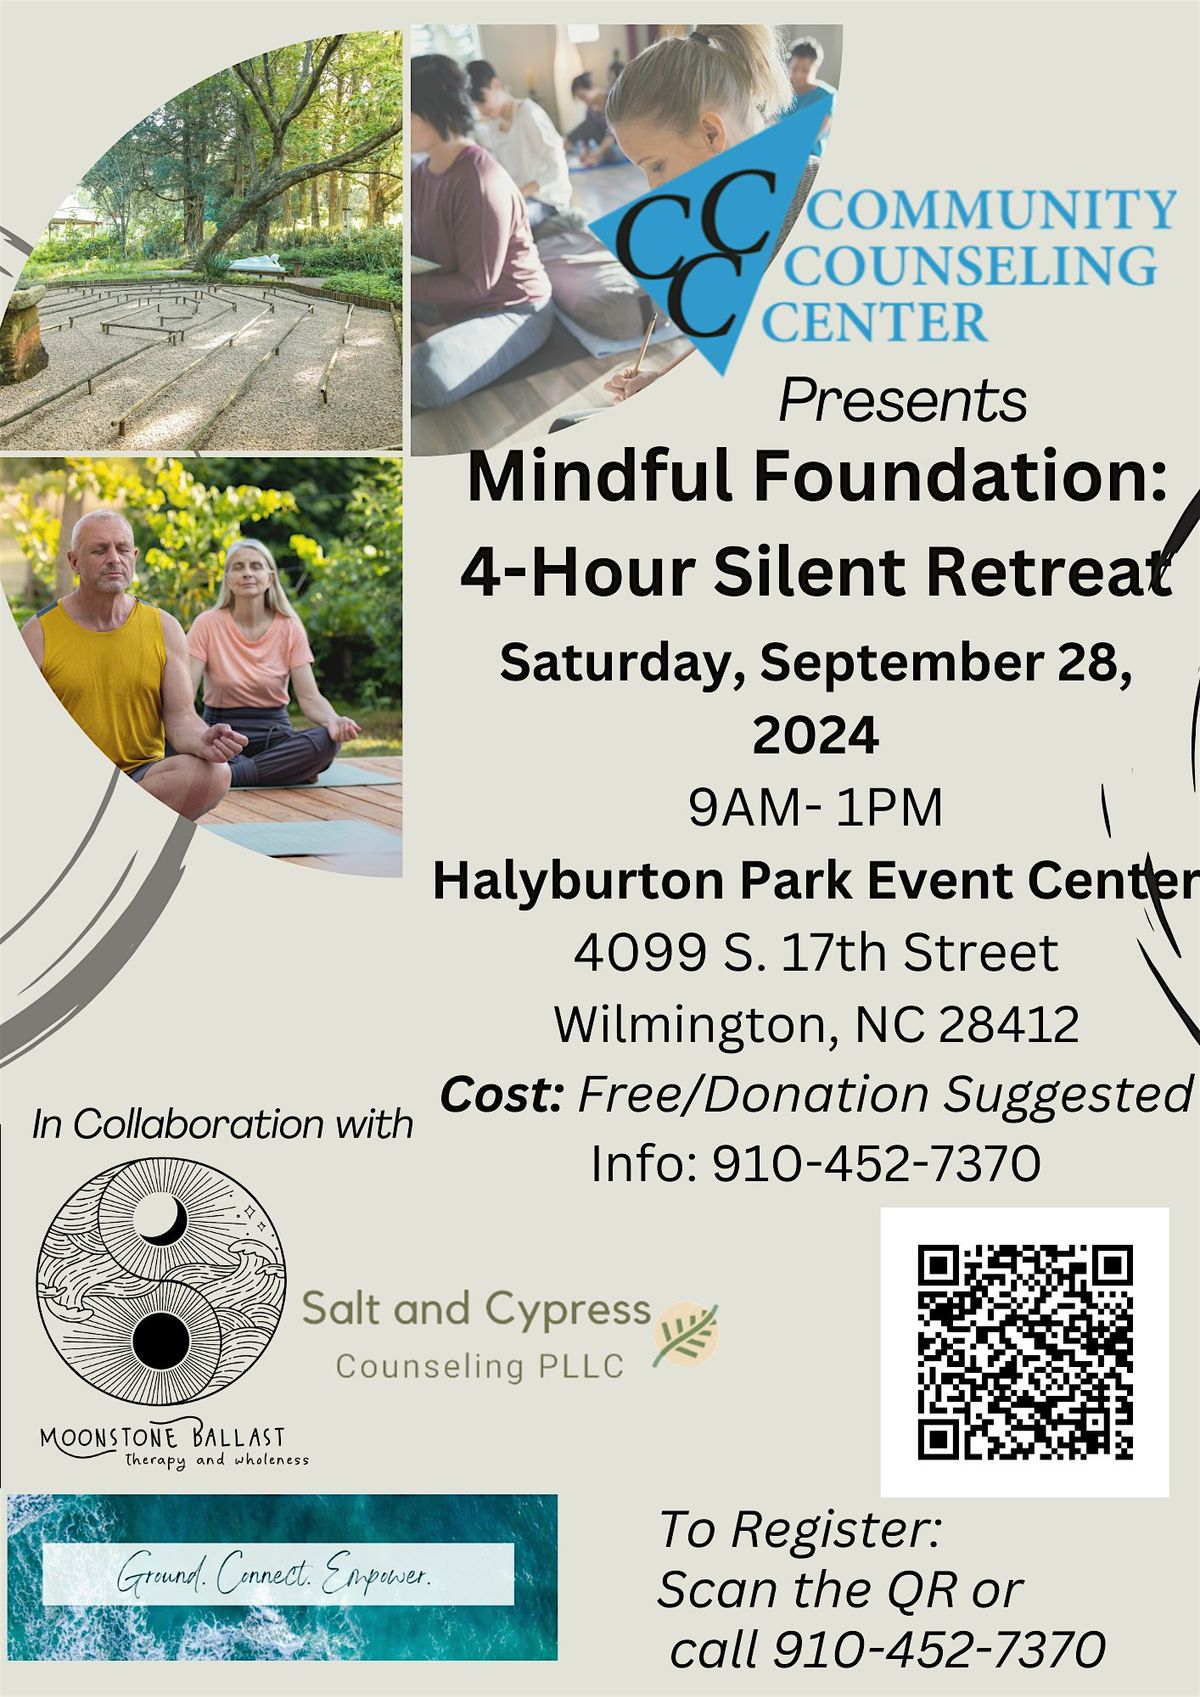 Community Counseling Center's Silent Retreat: Mindful Foundations